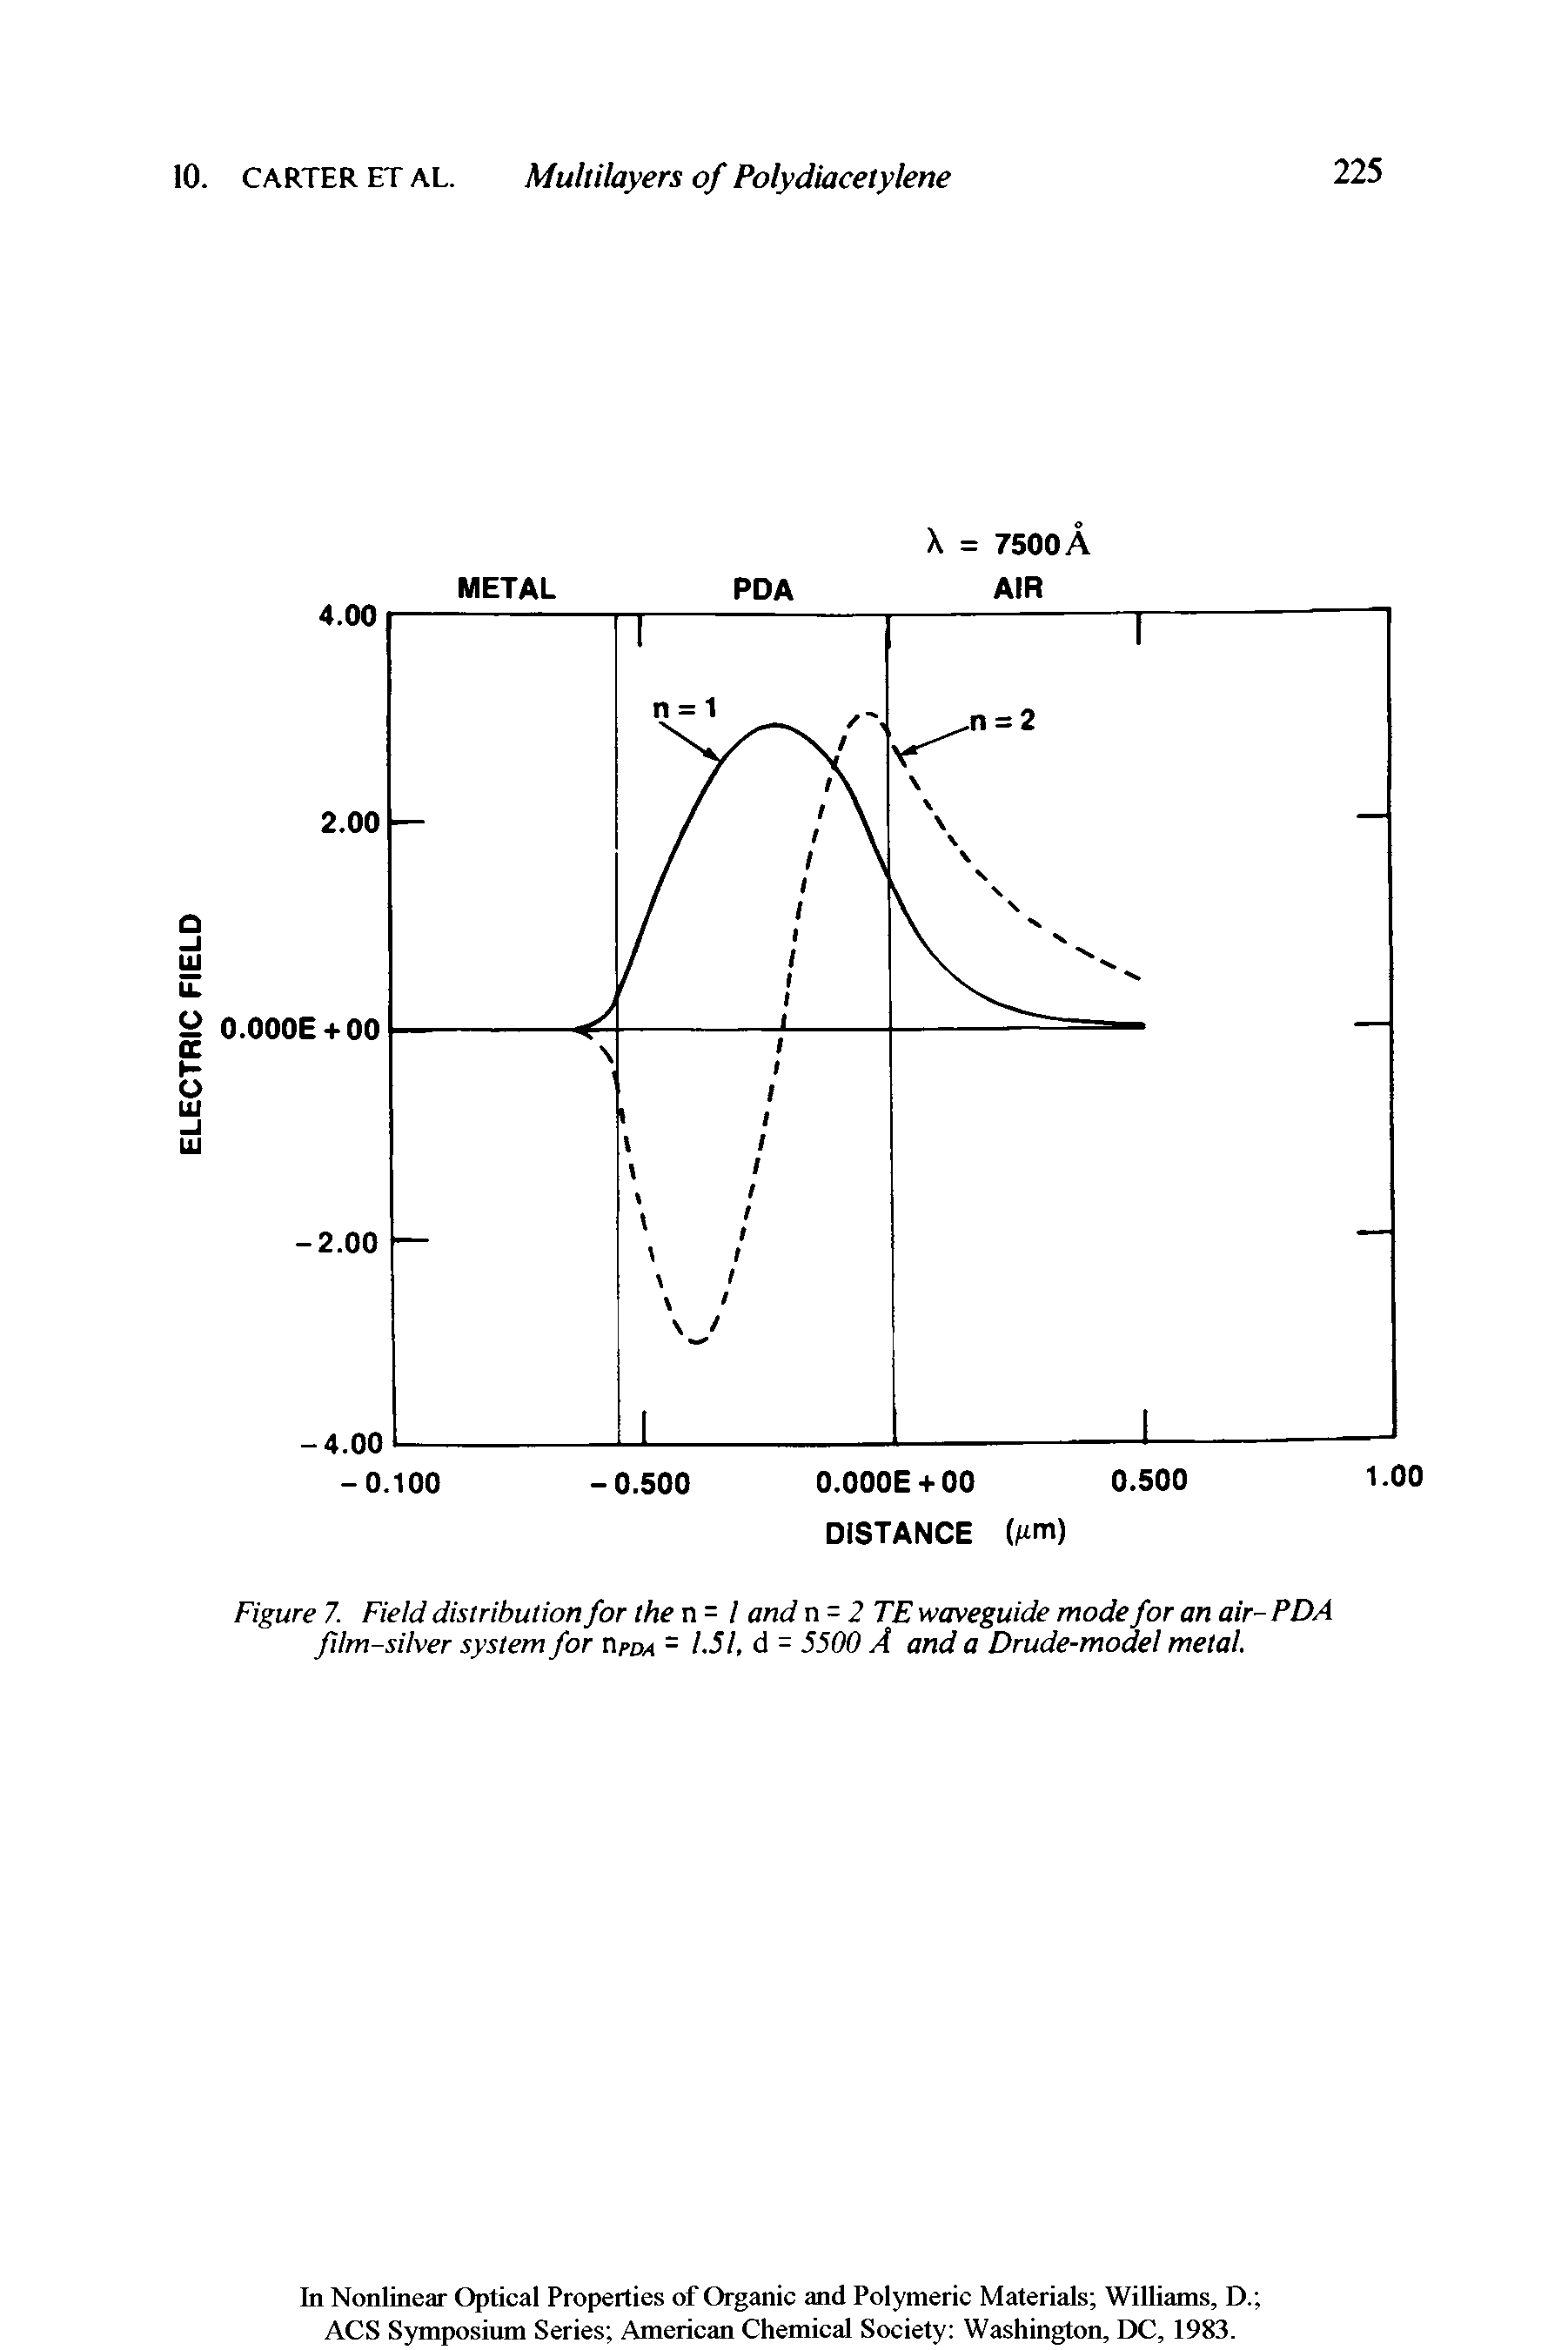 Figure 7. Field distribution for the n = / and n -2 TE waveguide mode for an air-PDA film-silver system for npda = 1.51, d = 5500 A and a Drude-model metal.